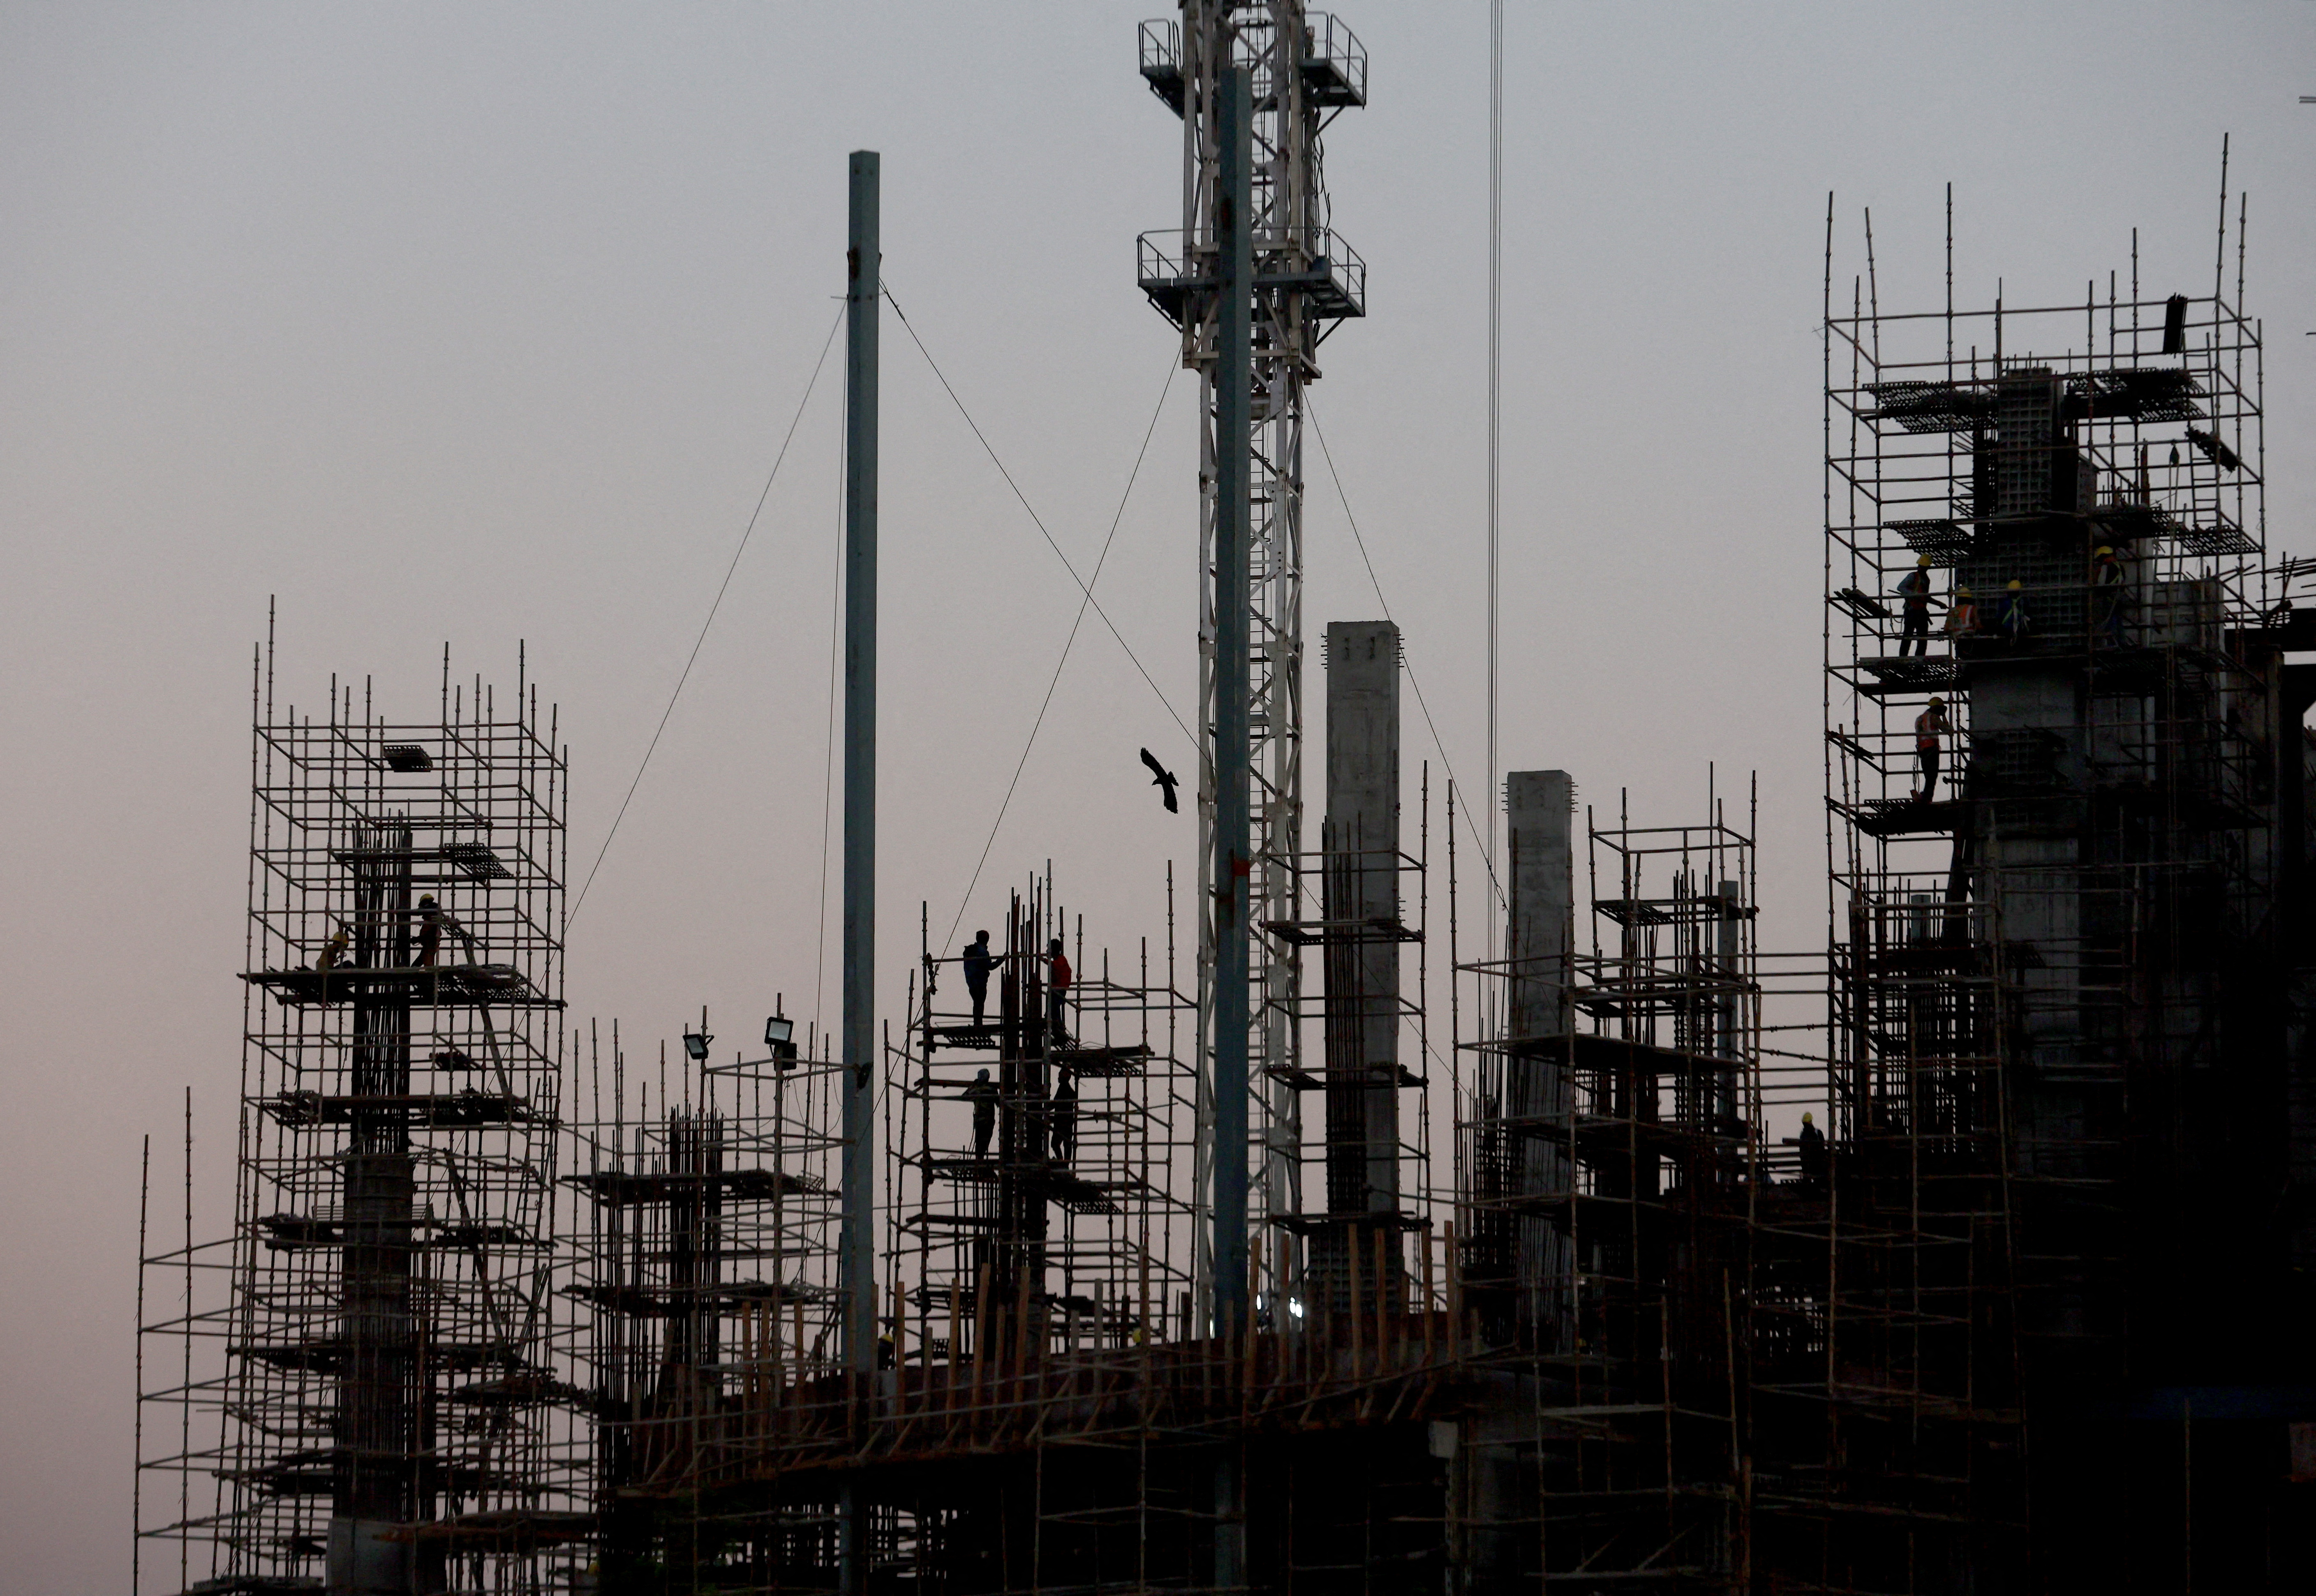 Labourers work at the construction site of a commercial building in New Delhi